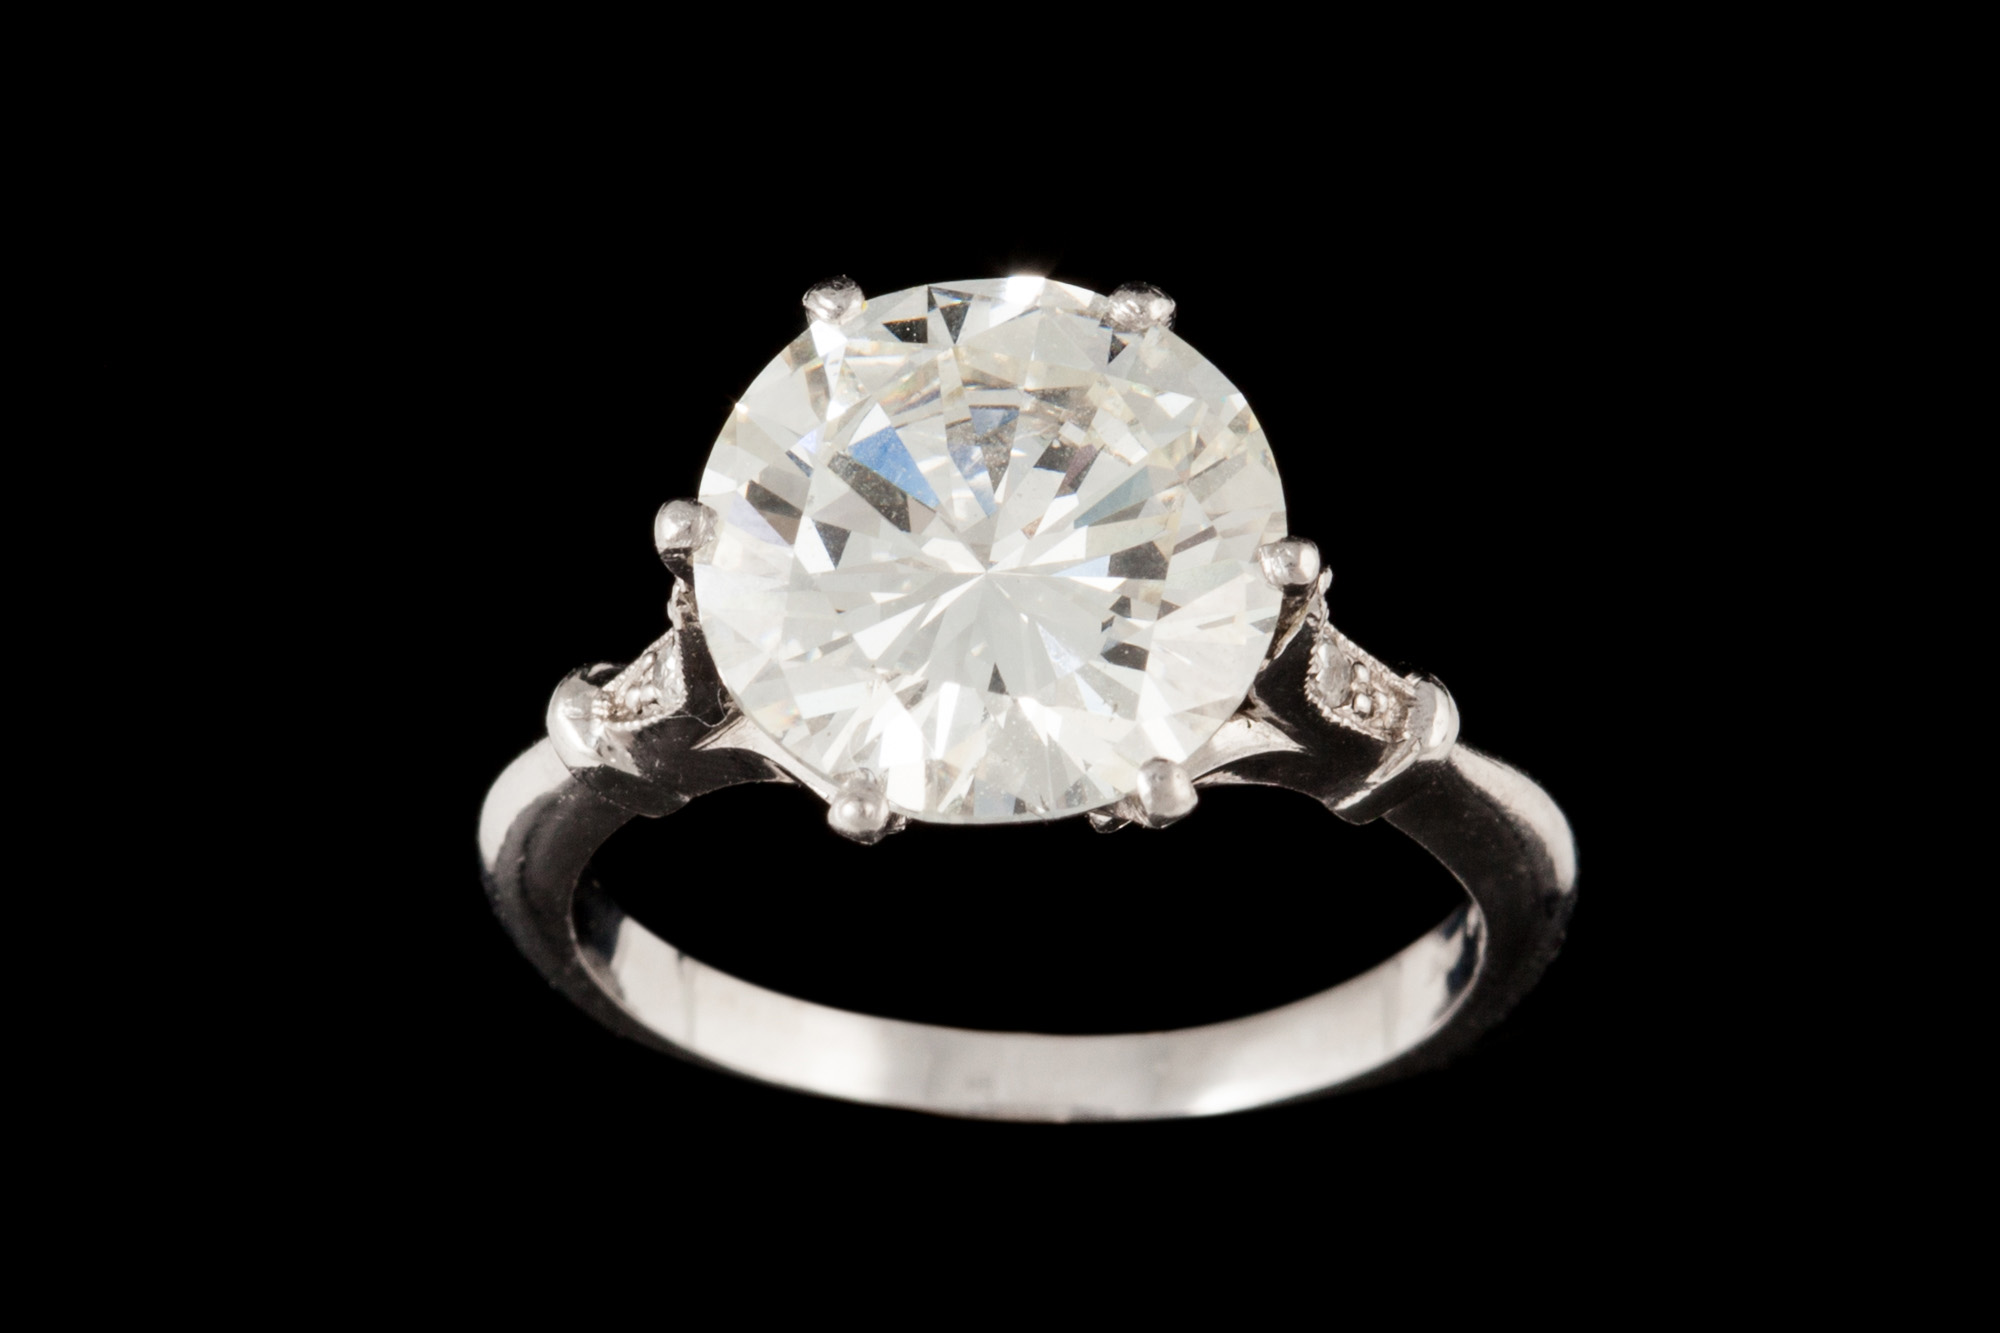 A DIAMOND SOLITAIRE RING, with DCL report stating the diamond to be 5.01ct J/K VS2, mounted in